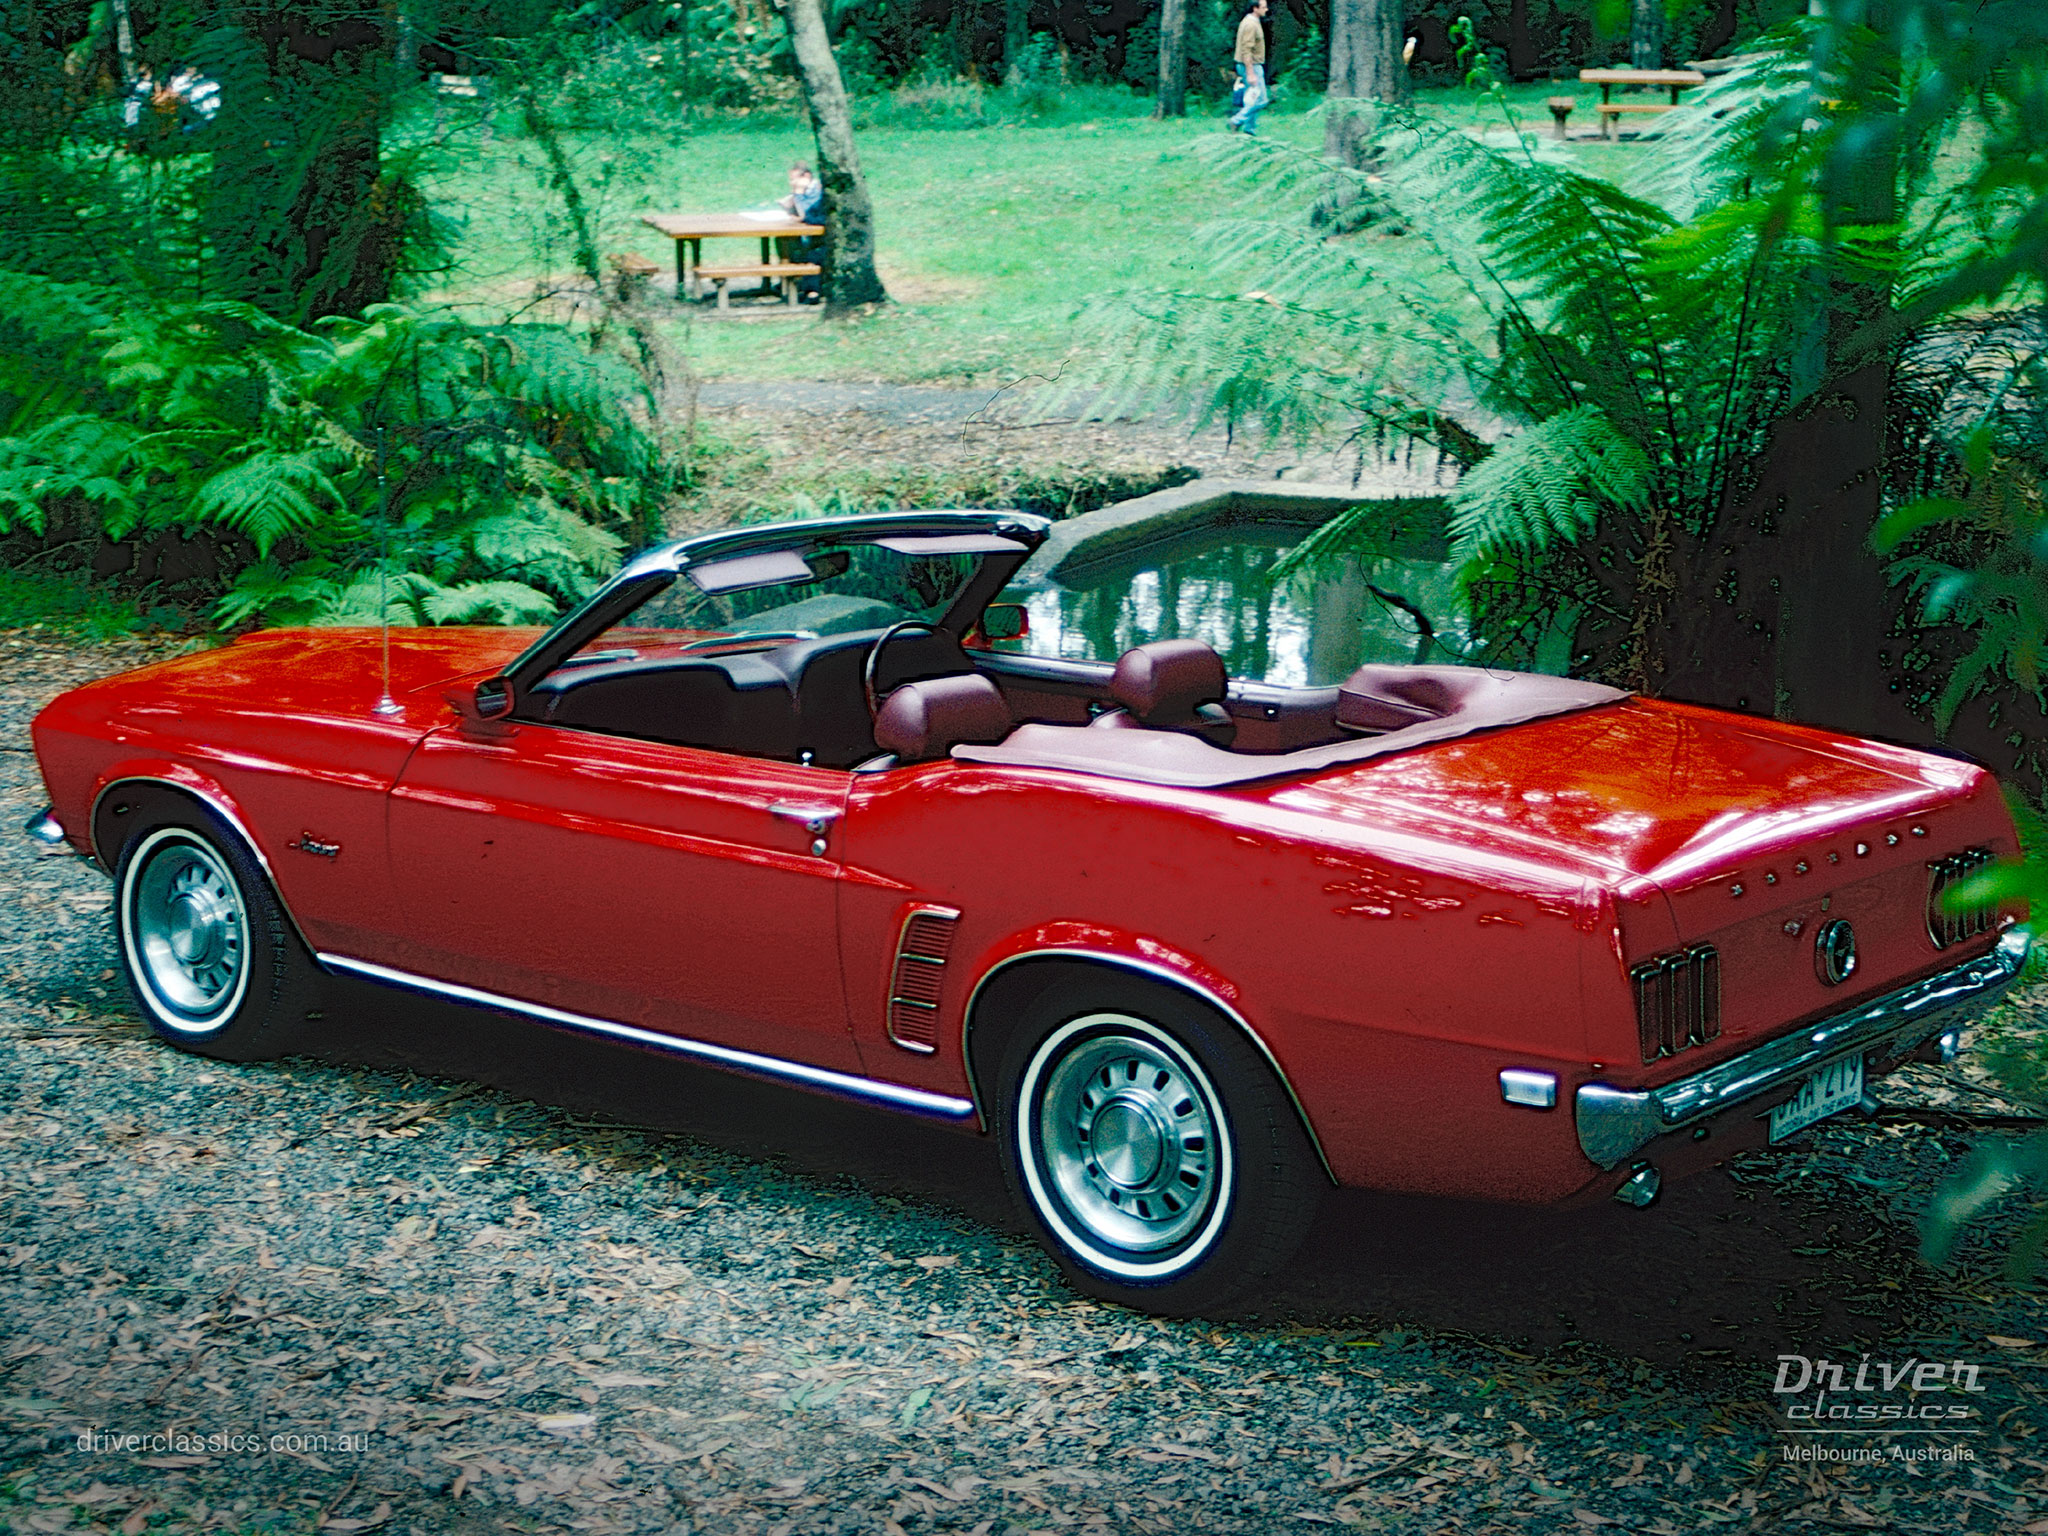 Ford Mustang (1969 model) Convertible, left side and back, Photo taken in the Dandenong Ranges VIC in 1998.